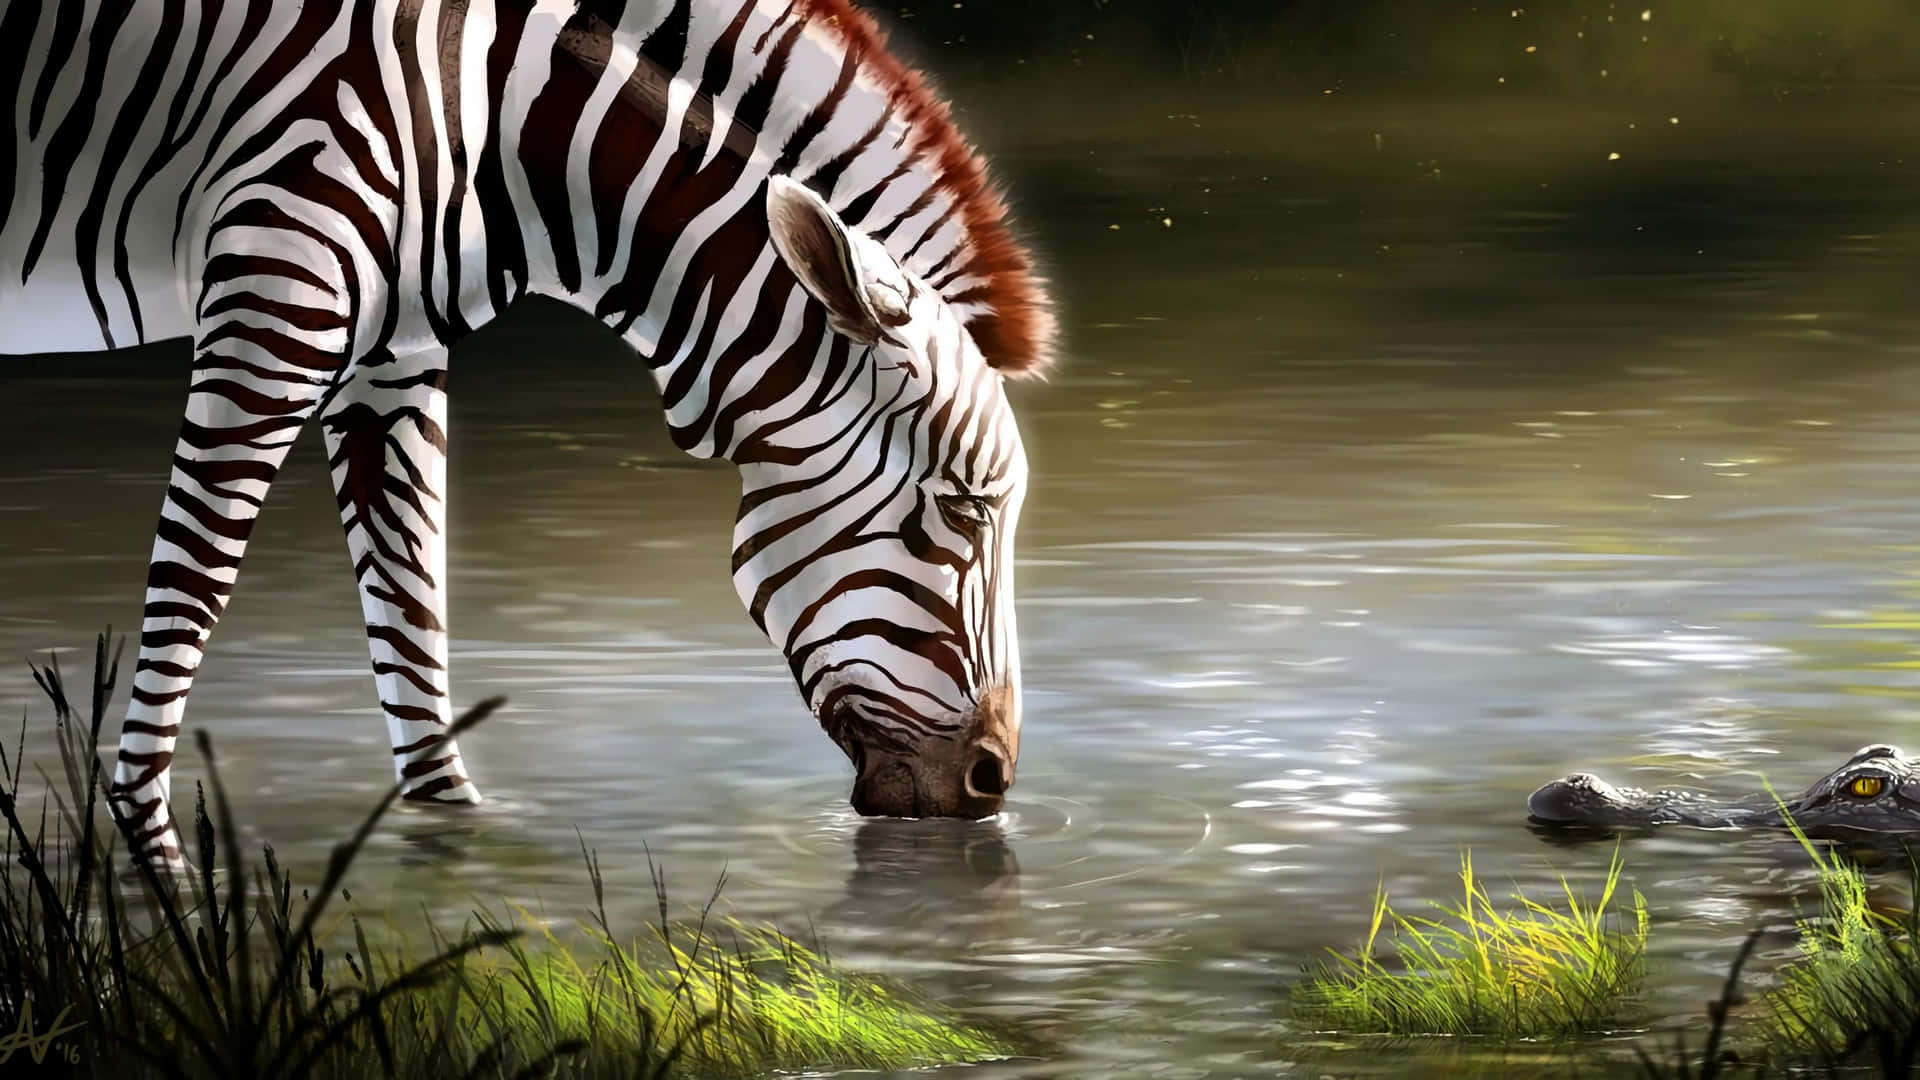 a zebra drinking water from a pond